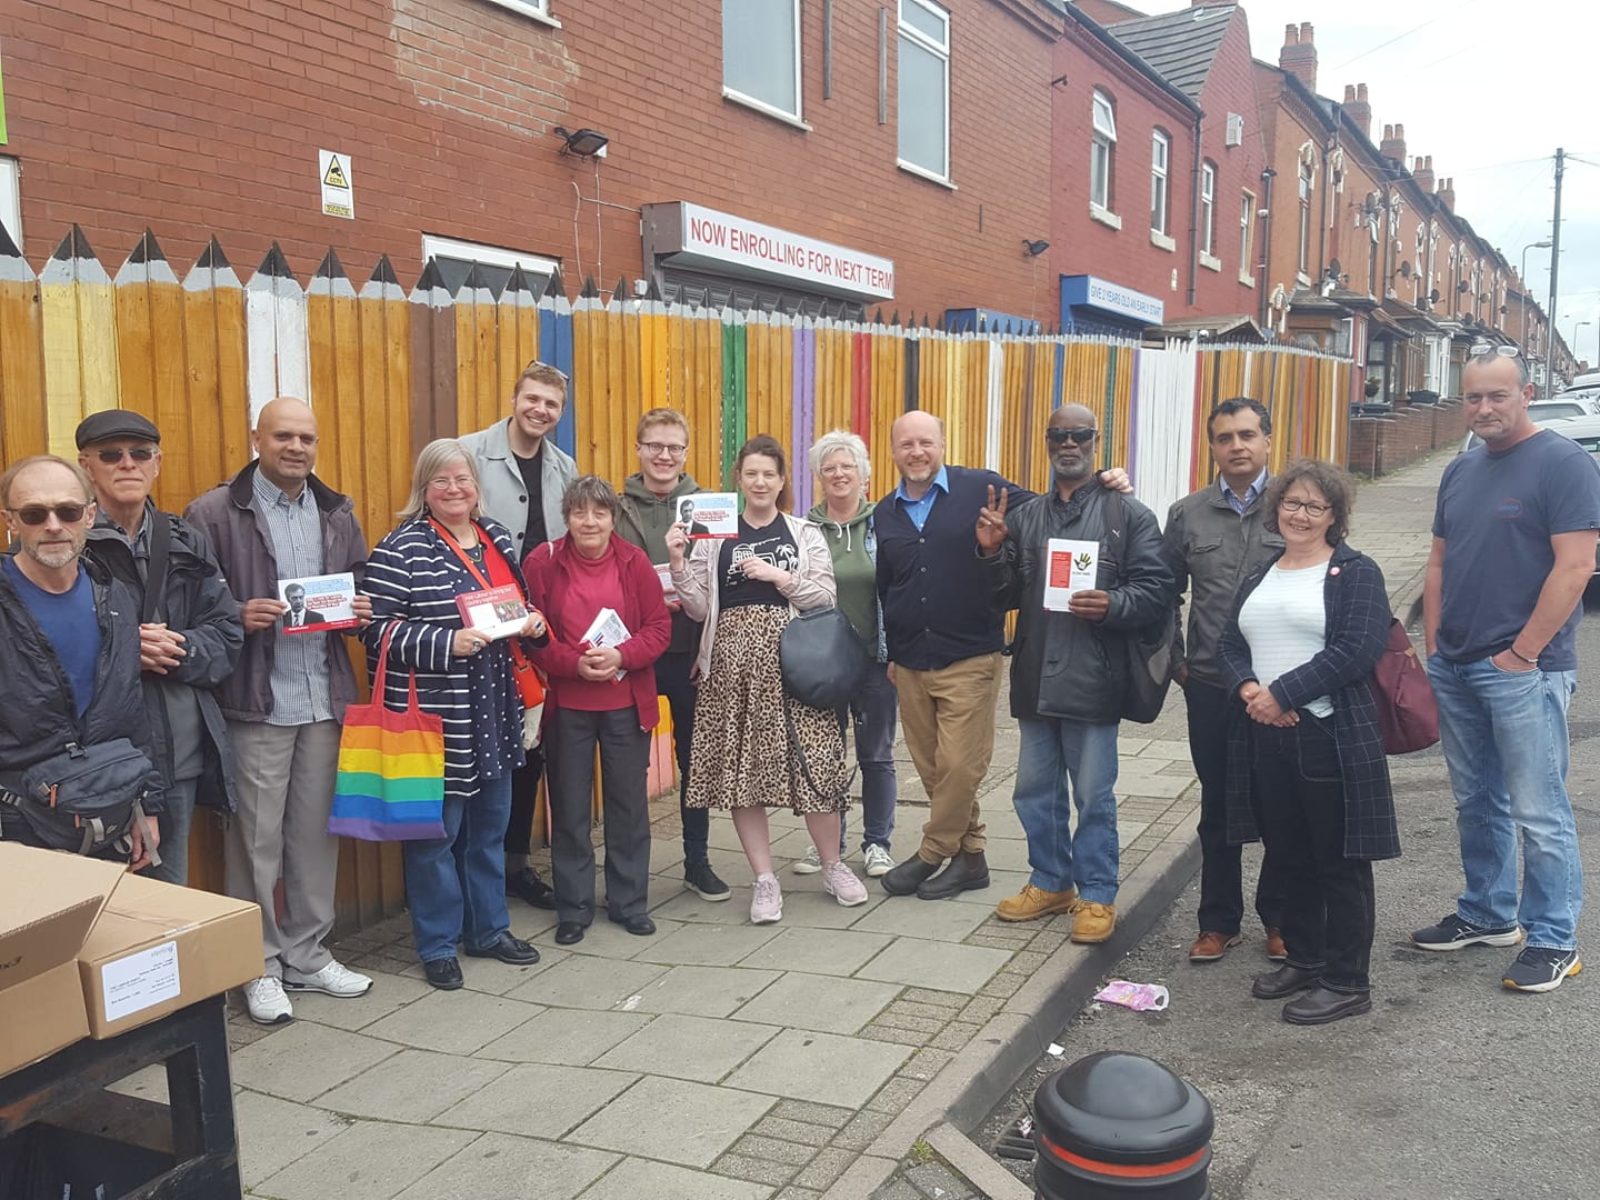 Labour Members ahead of a leafleting afternoon in Sparkhill